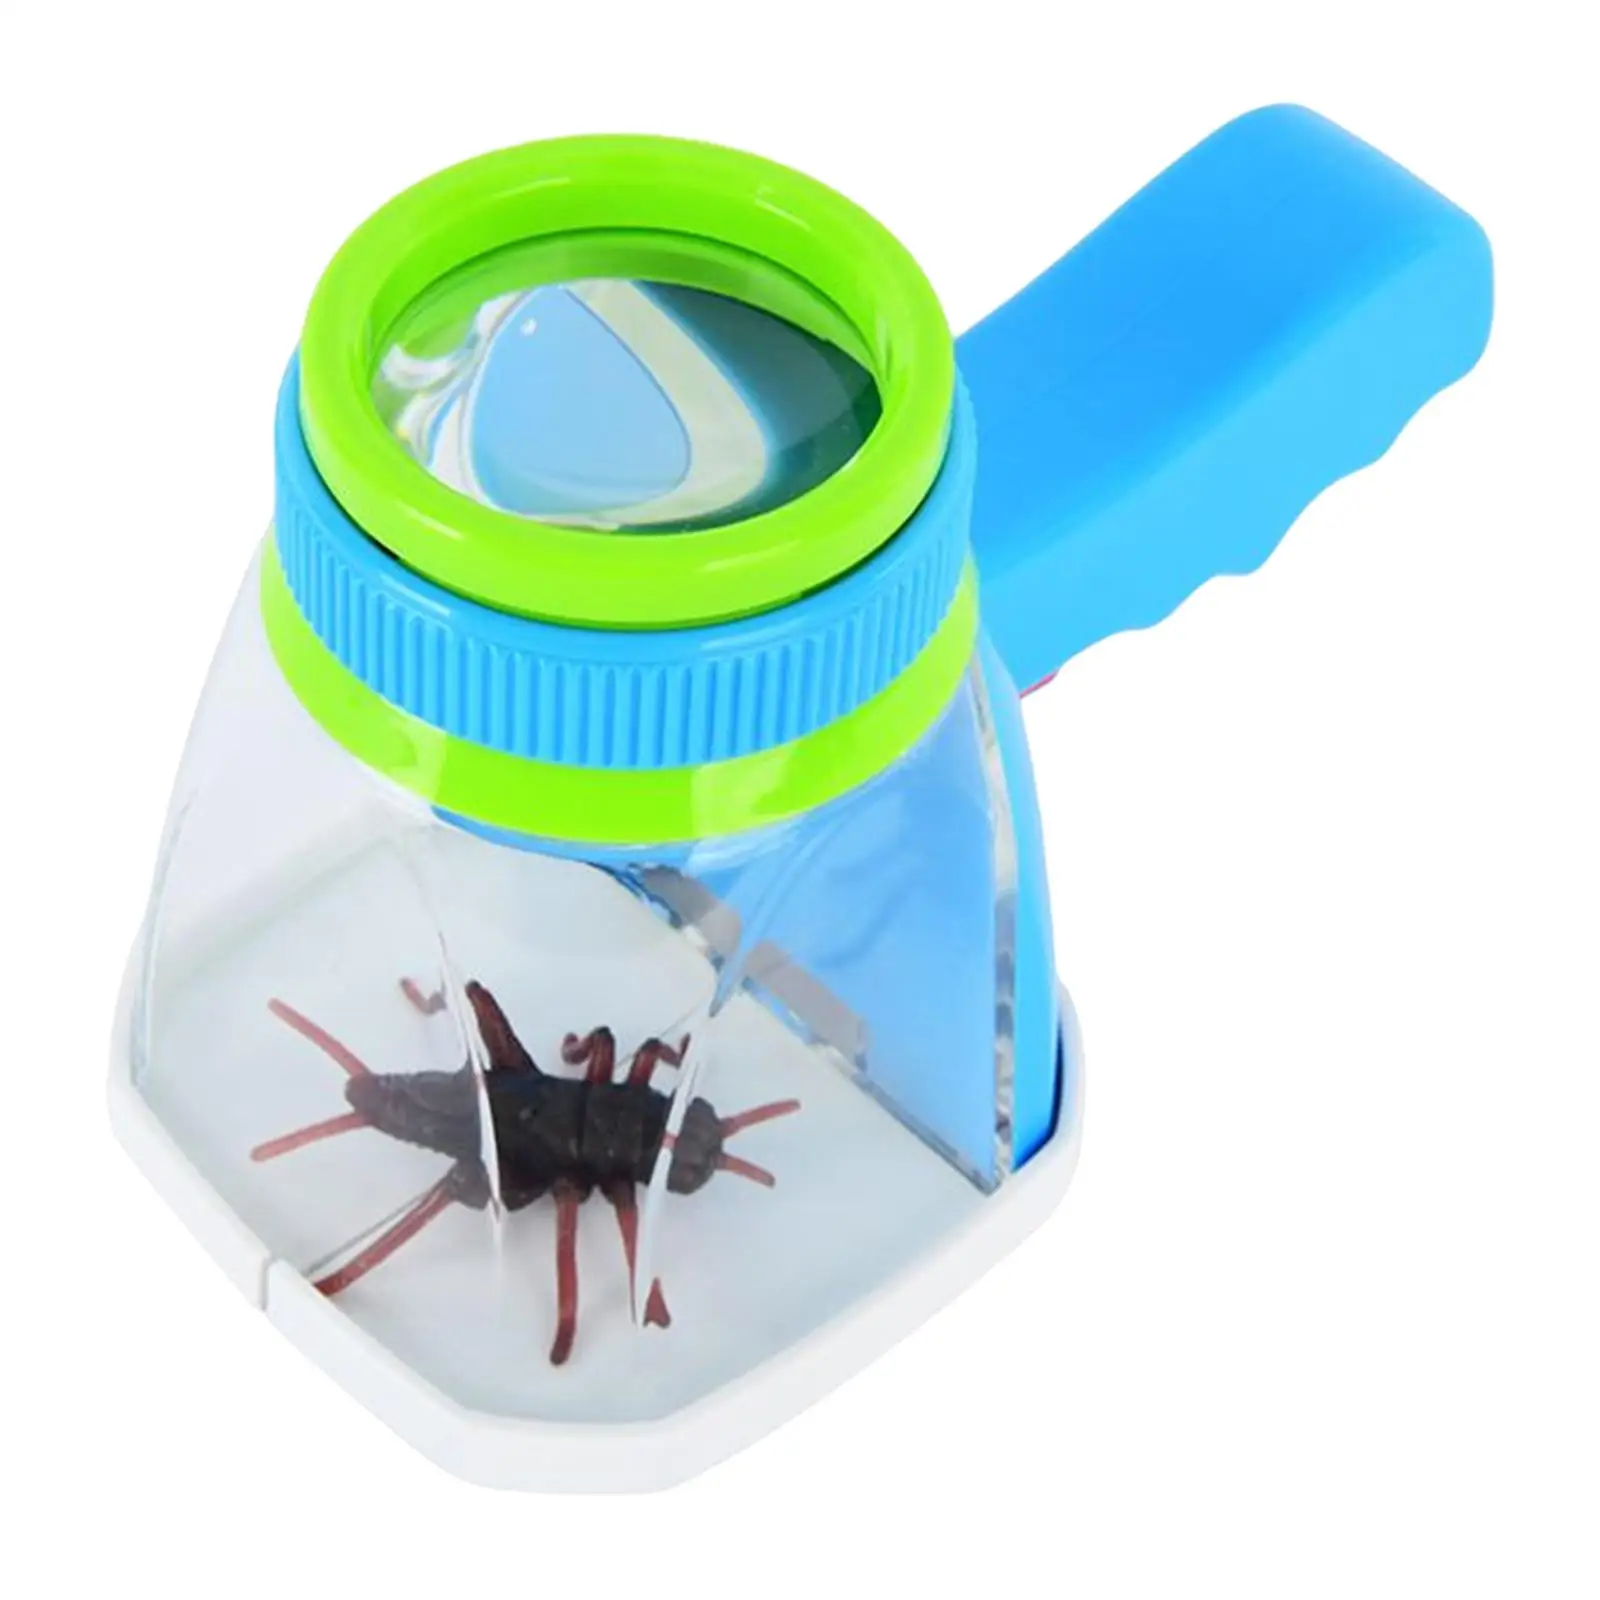 Portable Insect Observation Box Bug Viewer Learning Toys with Light Magnifying Glass Observation Box for Boys Girls Children